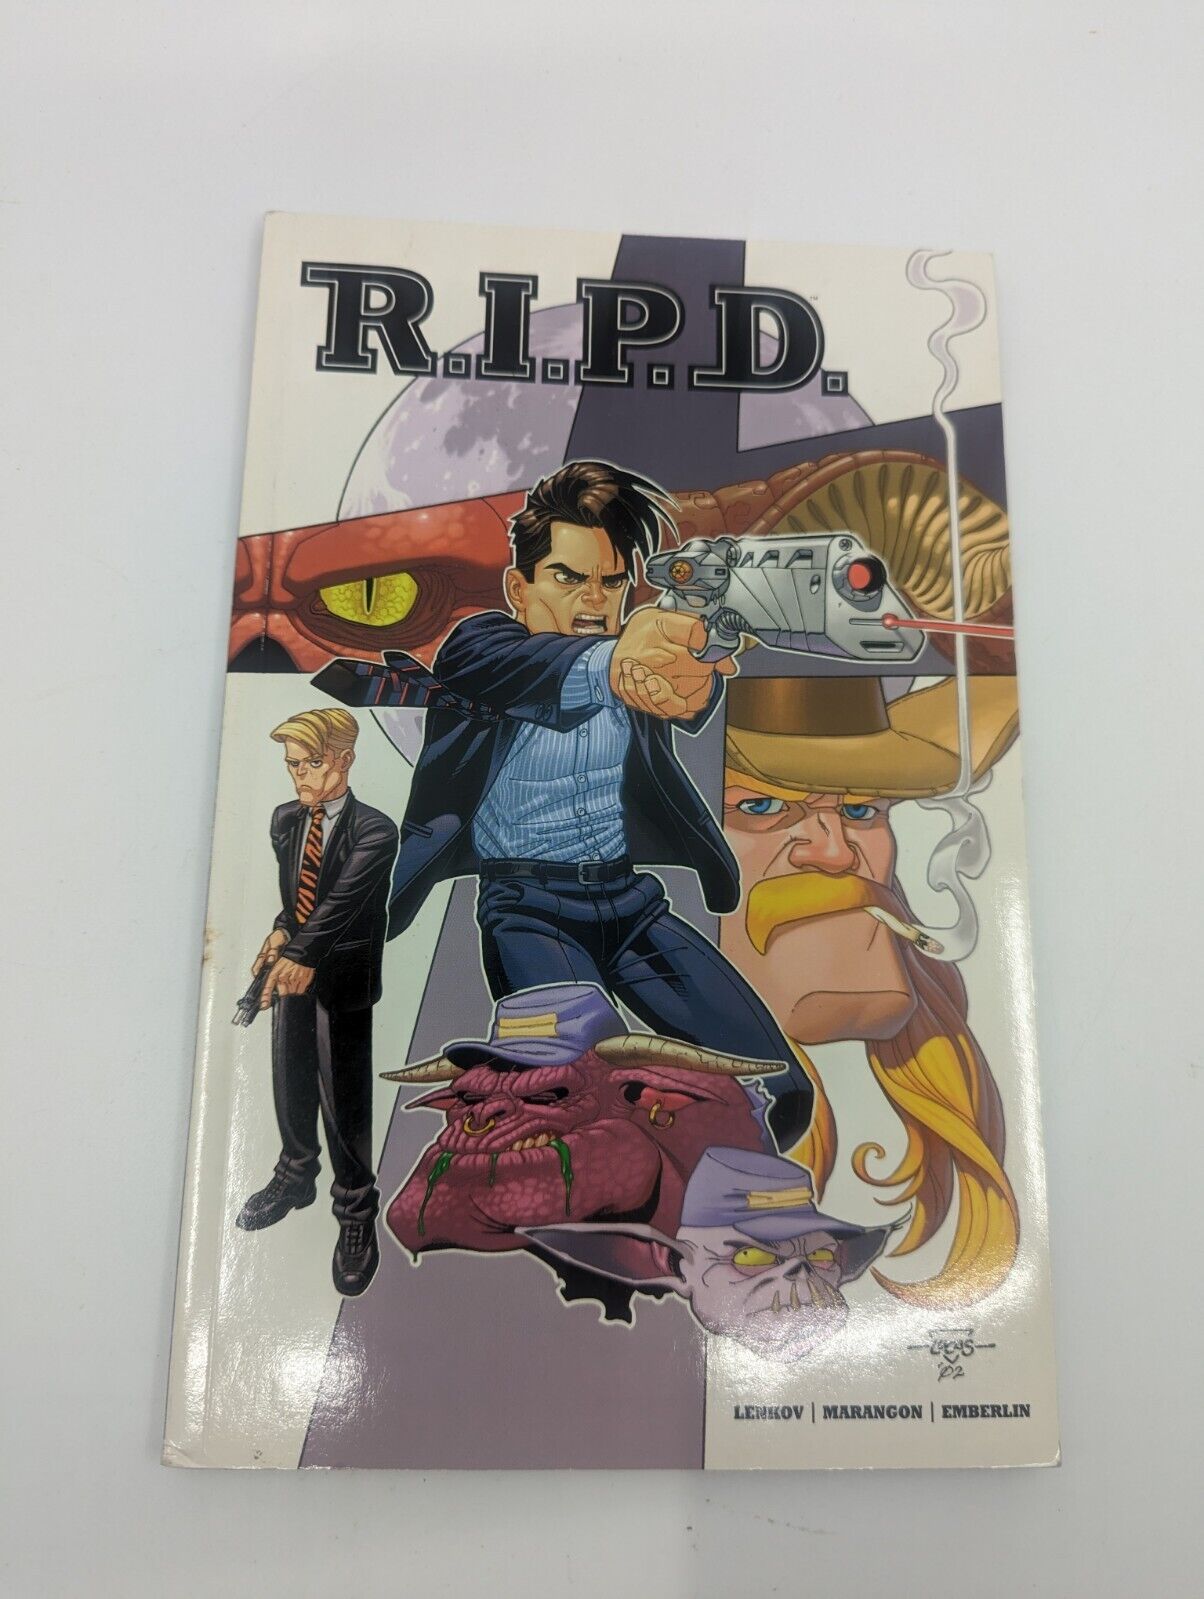 R.I.P.D. - RIPD Darkhorse TPB Graphic Novel (2003) Collects 1-4